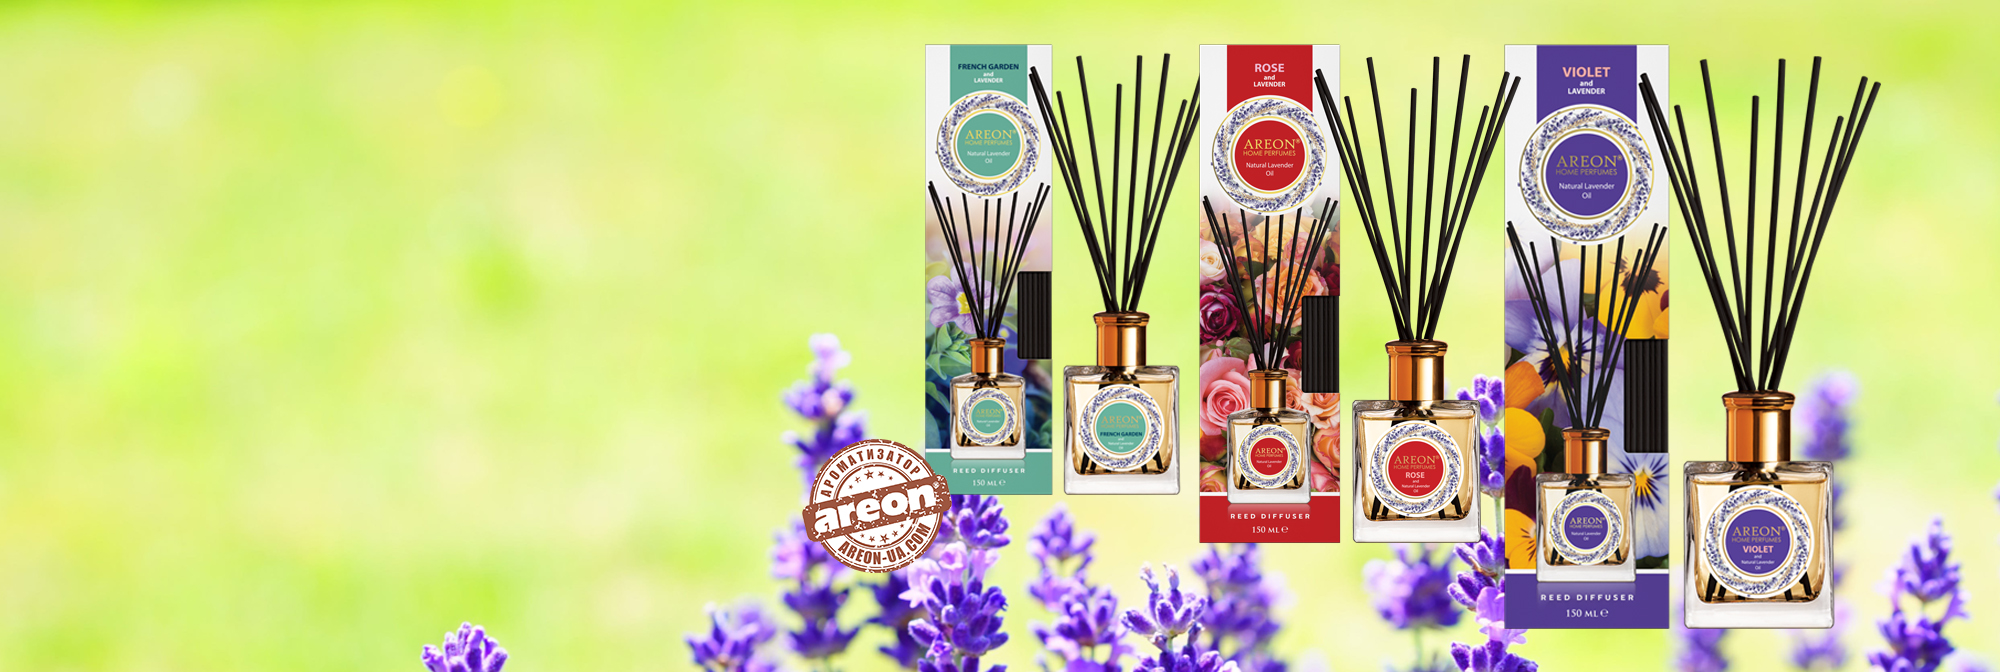 Areon Home Perfumes Natural Lavender Oil